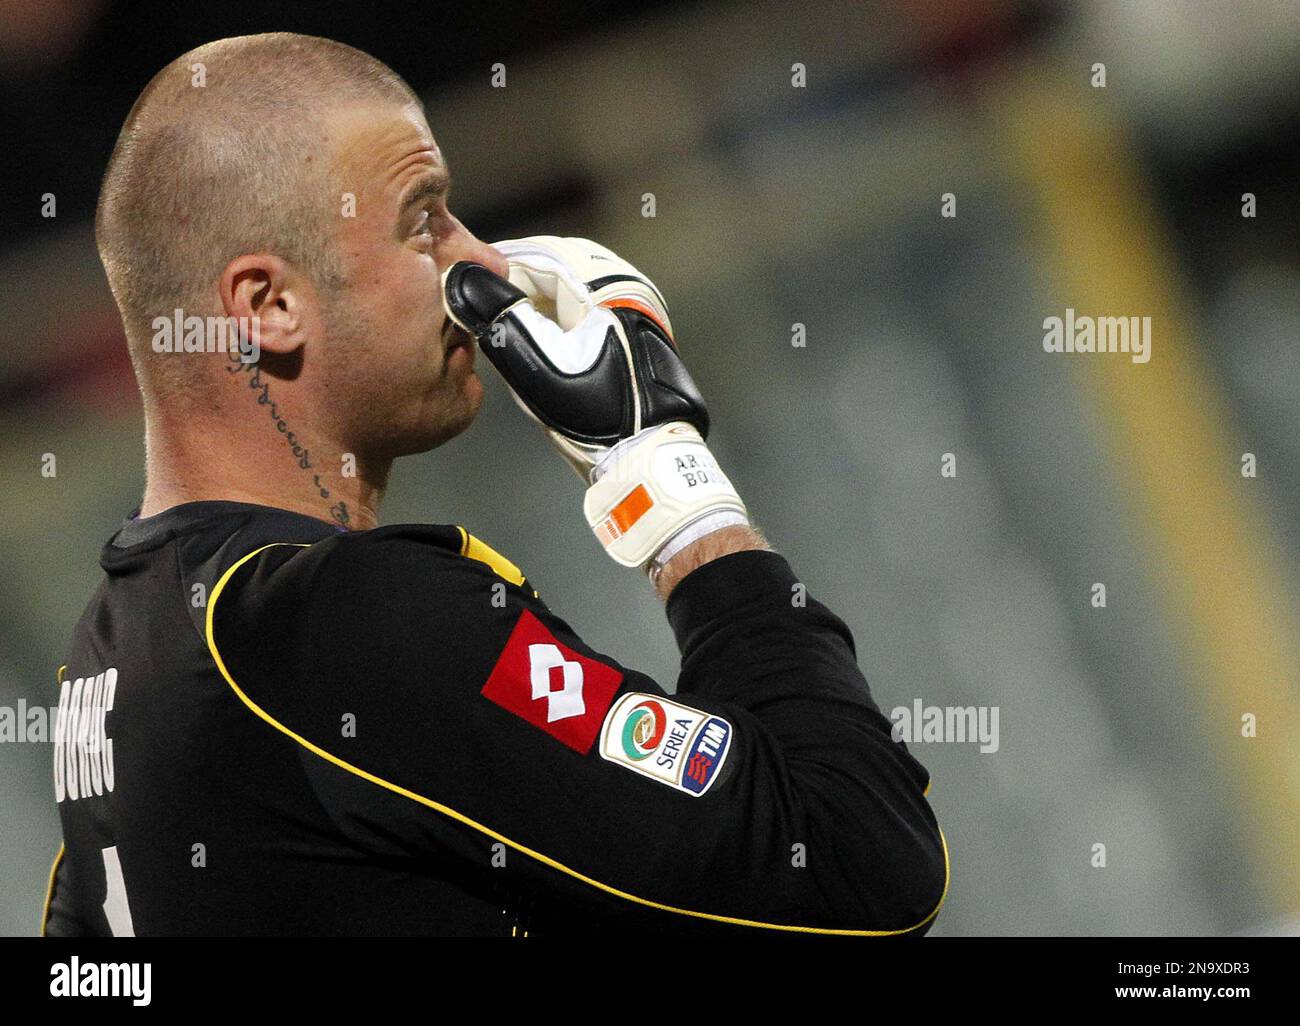 Fiorentina goalkeeper Artur Boruc of Poland looks on during a Serie A  soccer match between Fiorentina and Novara at the Artemio Franchi stadium  in Florence, Italy, Wednesday, May 2, 2012. (AP Photo/Fabrizio